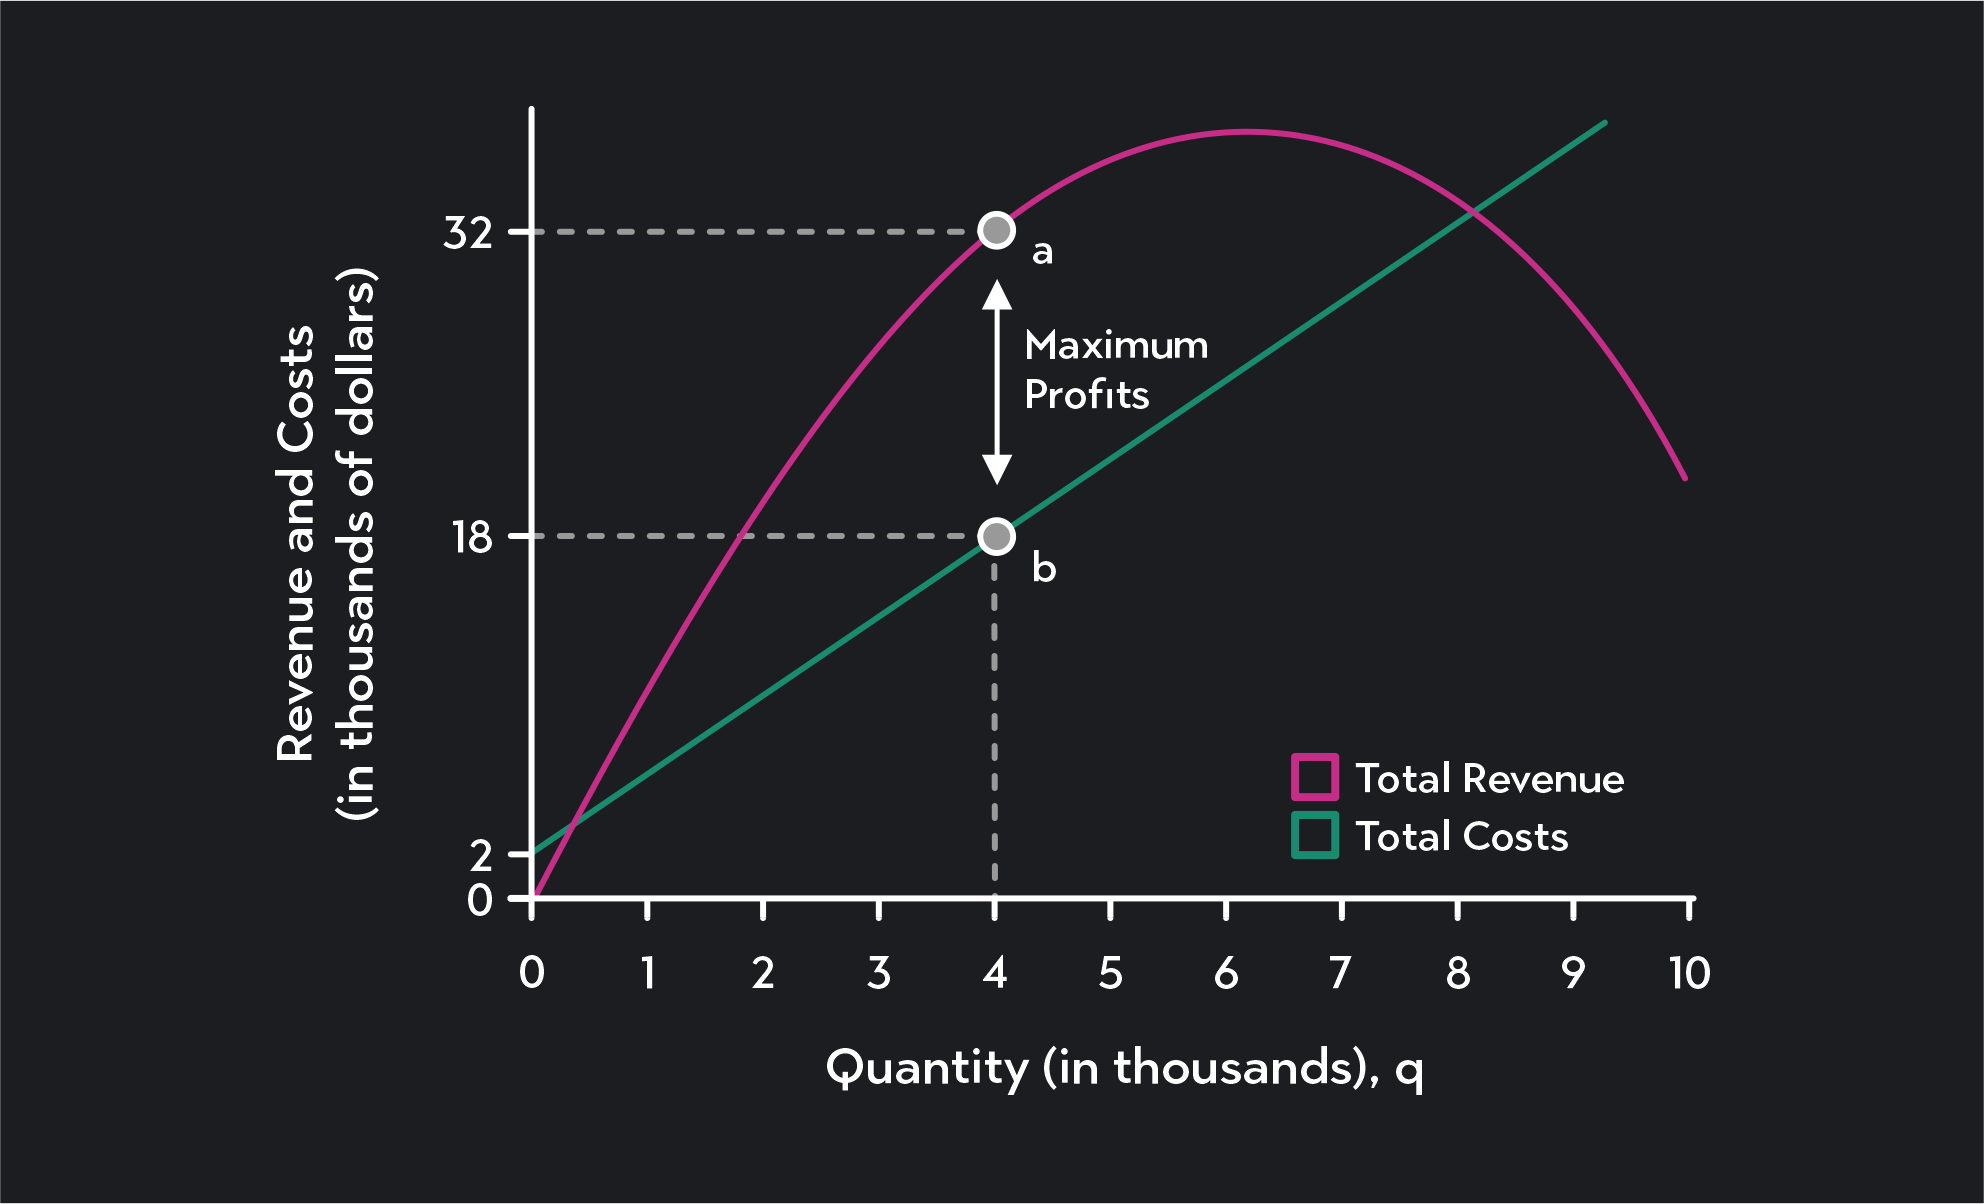 Graph showing the profit-maximizing quantity is 4,000 and max profits